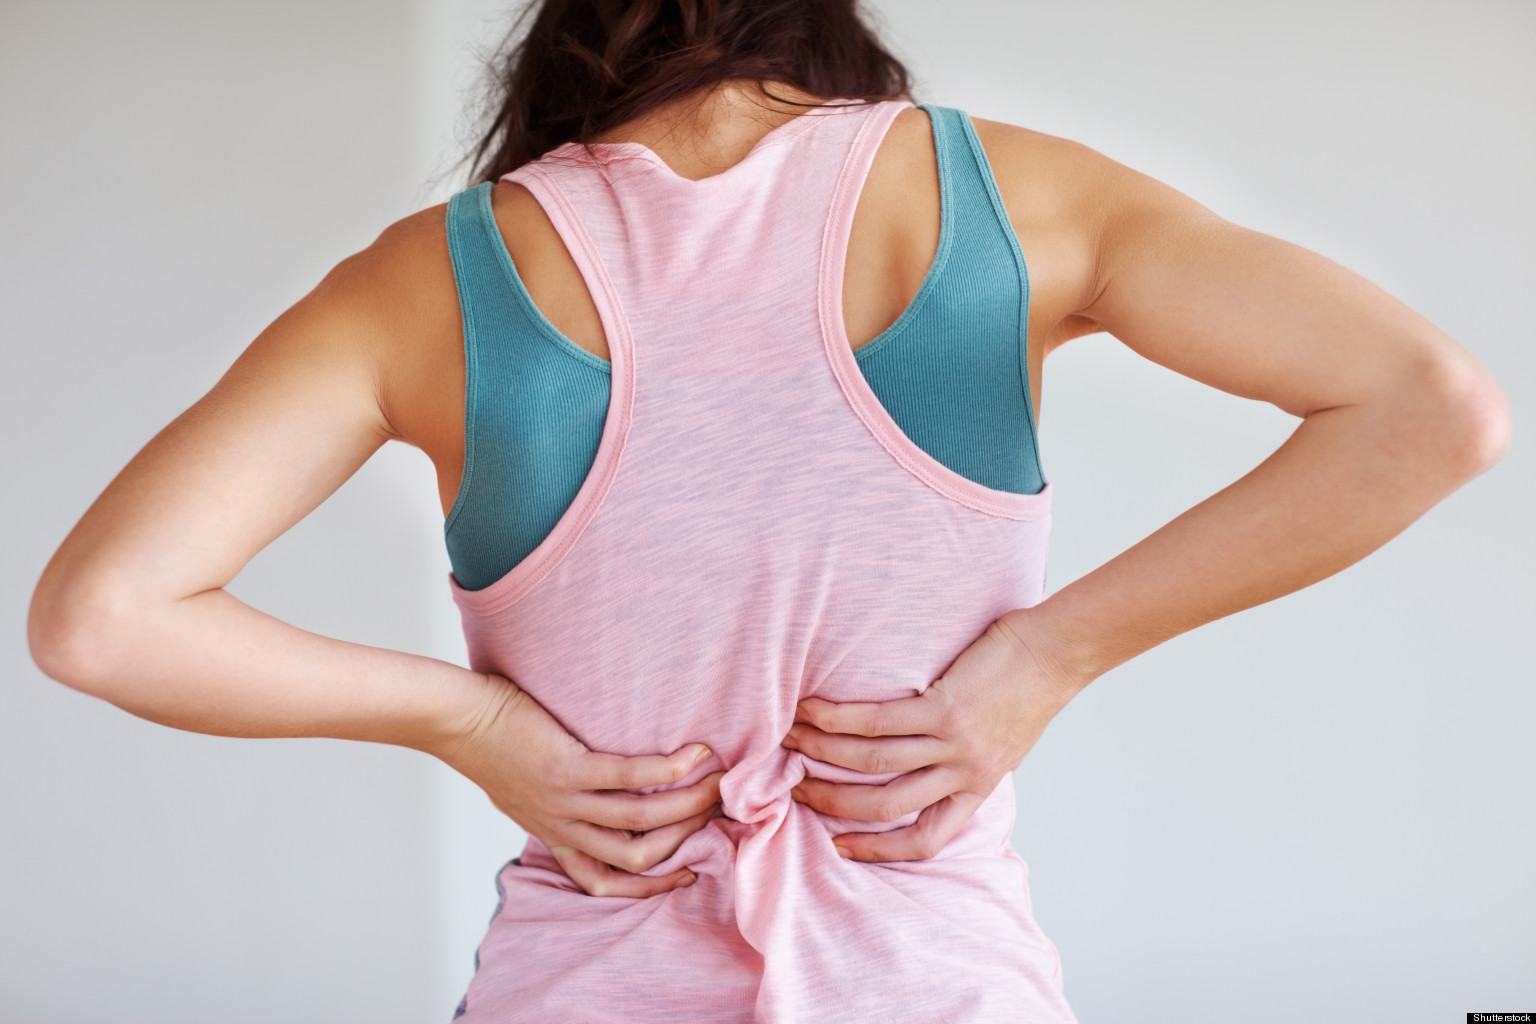 relieve back pain naturally 20 tips that will make the pain go away